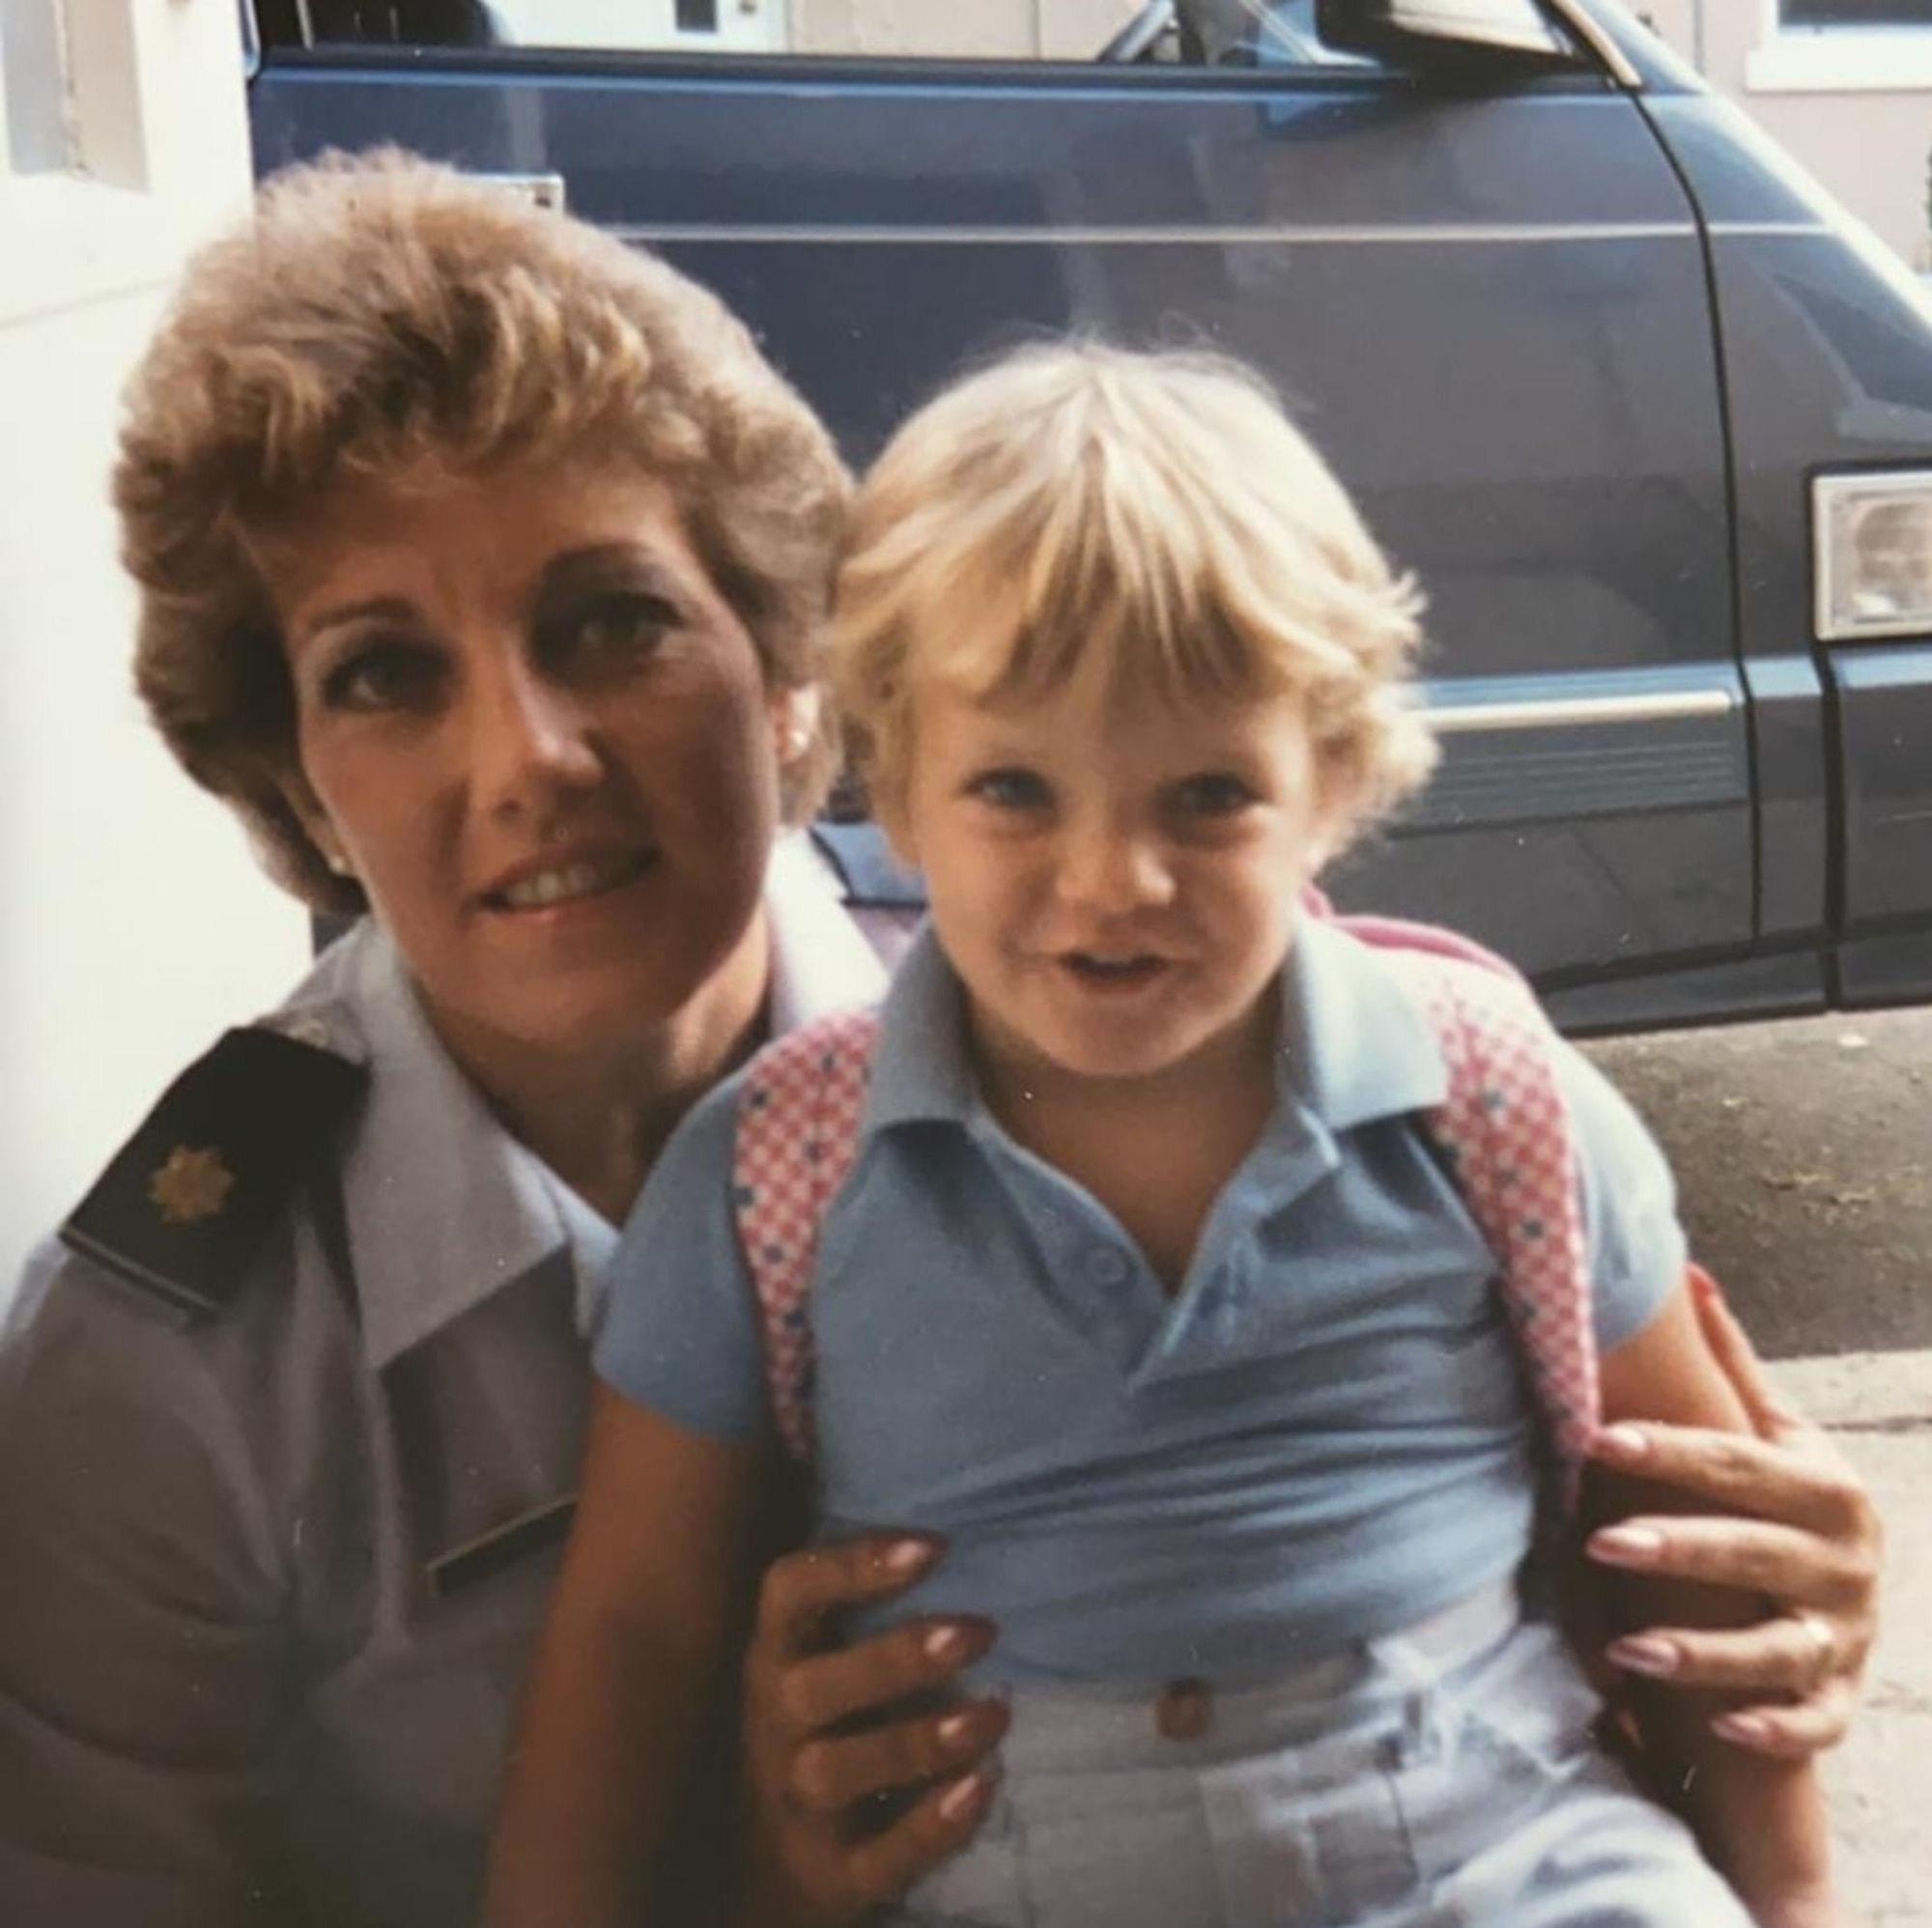 Colonel (U.S. Air Force, ret.) Donna Rosa, who was the first female group commander at Misawa Air Base, Japan, poses with her young daughter Courtney Barnett.